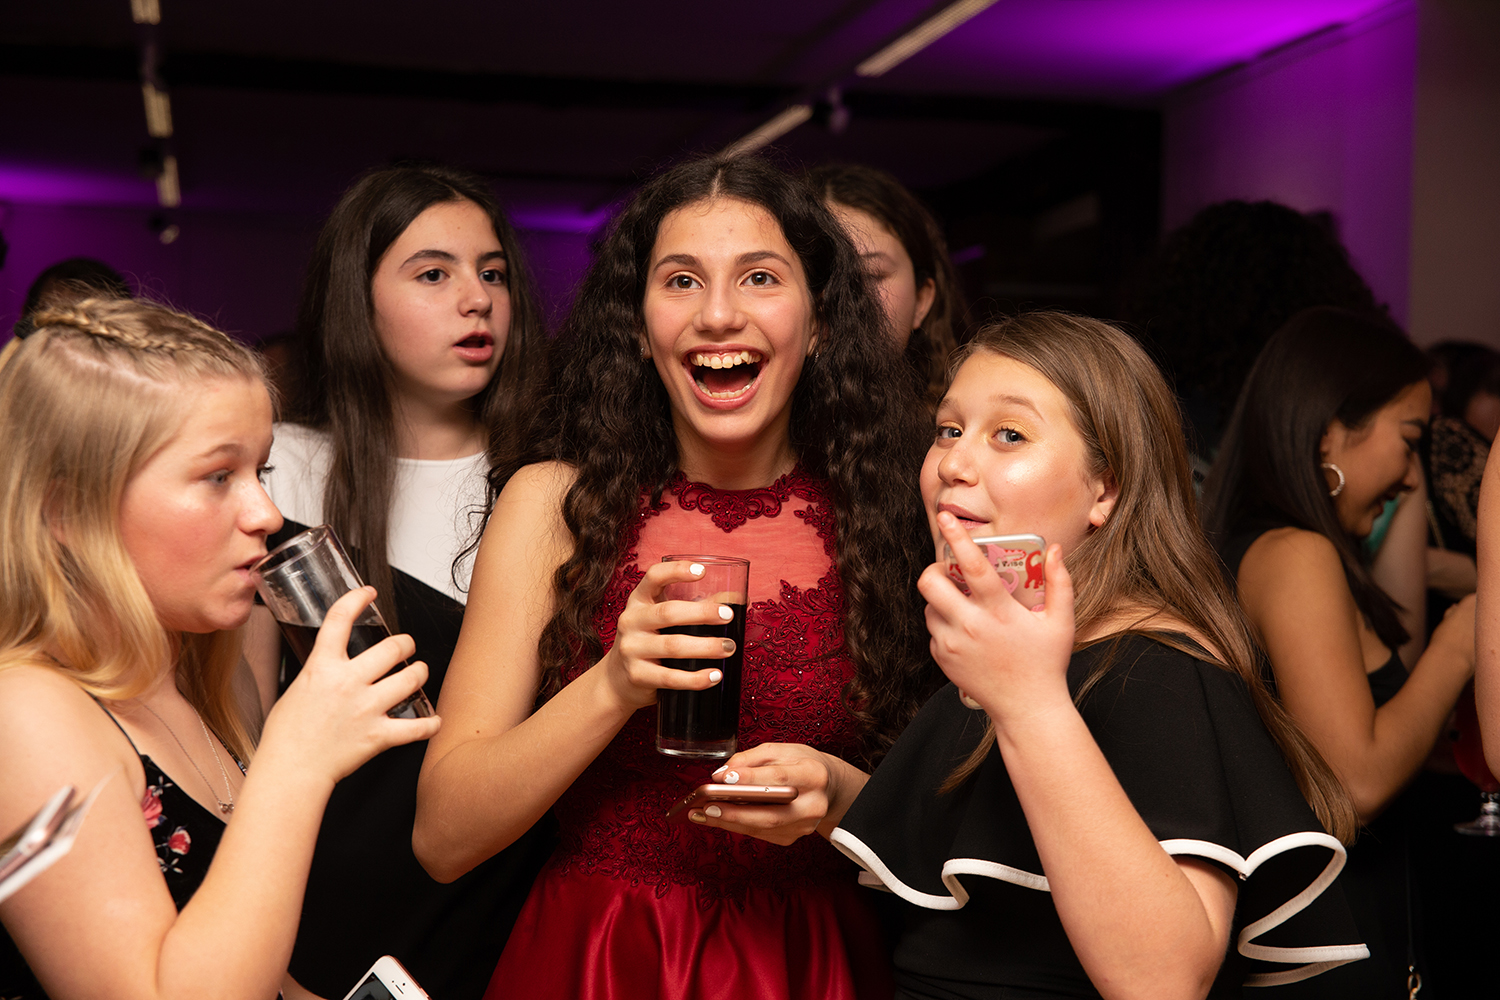 Girls laughing together drinking cokes at party